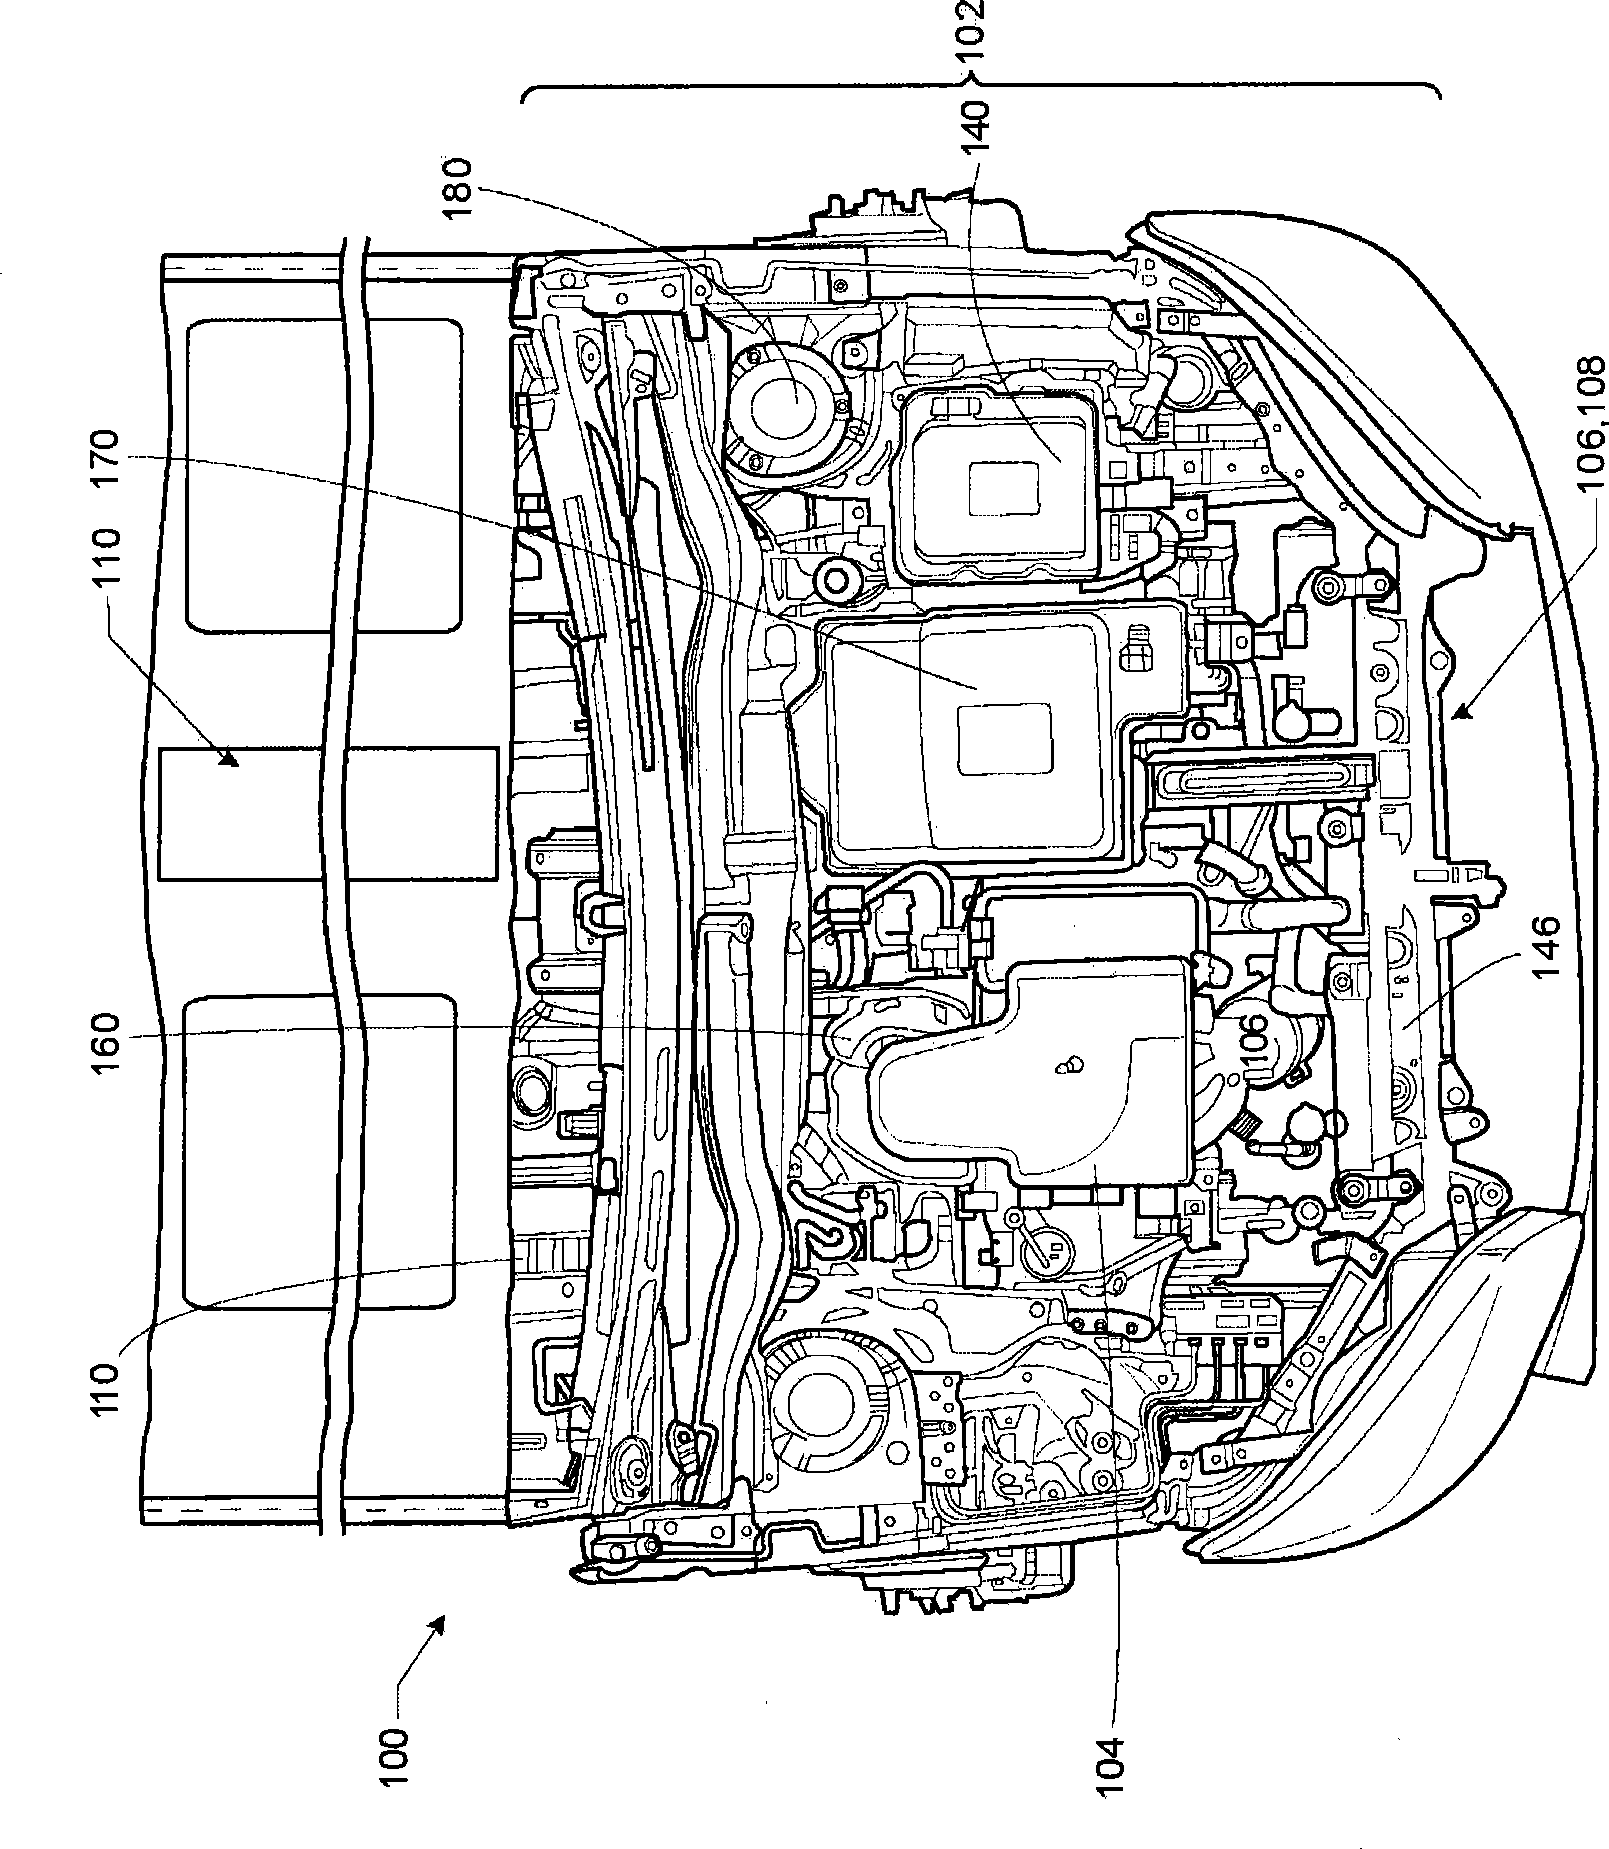 Hybrid vehicle with changeover panel assembly